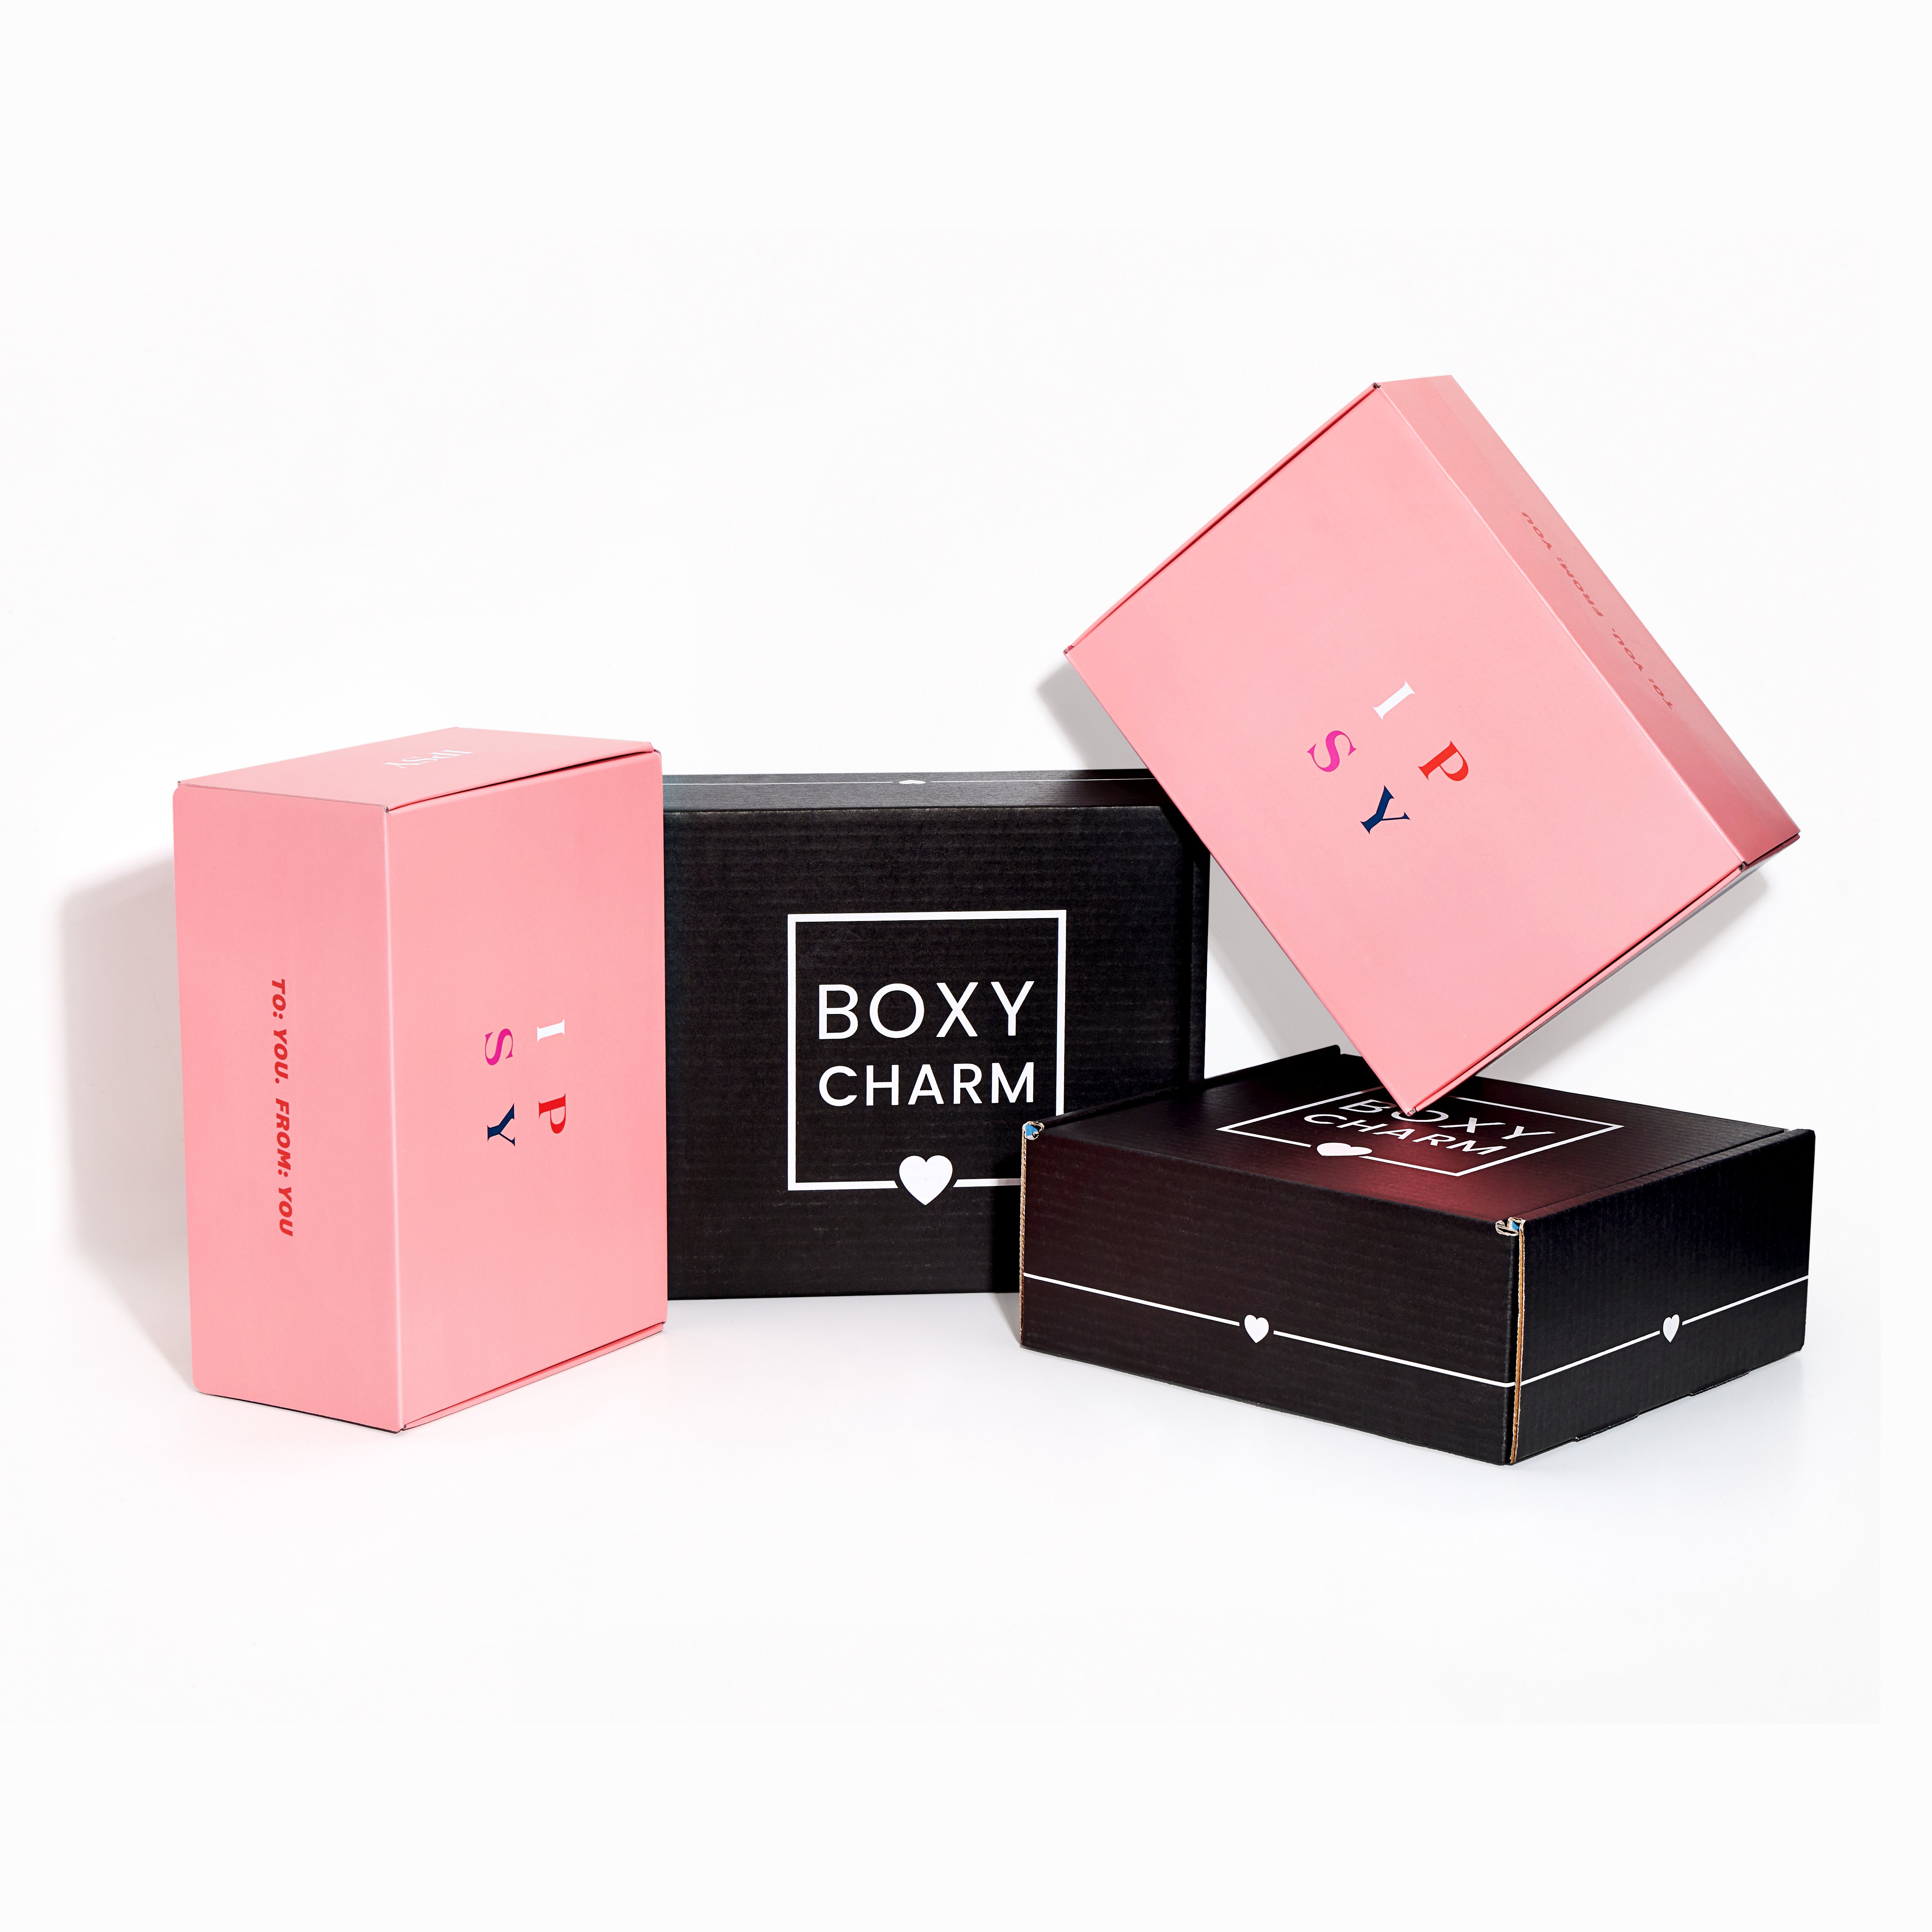 Ipsy and Boxycharm Merge Subscriptions to Create “Ultimate Beauty Membership”